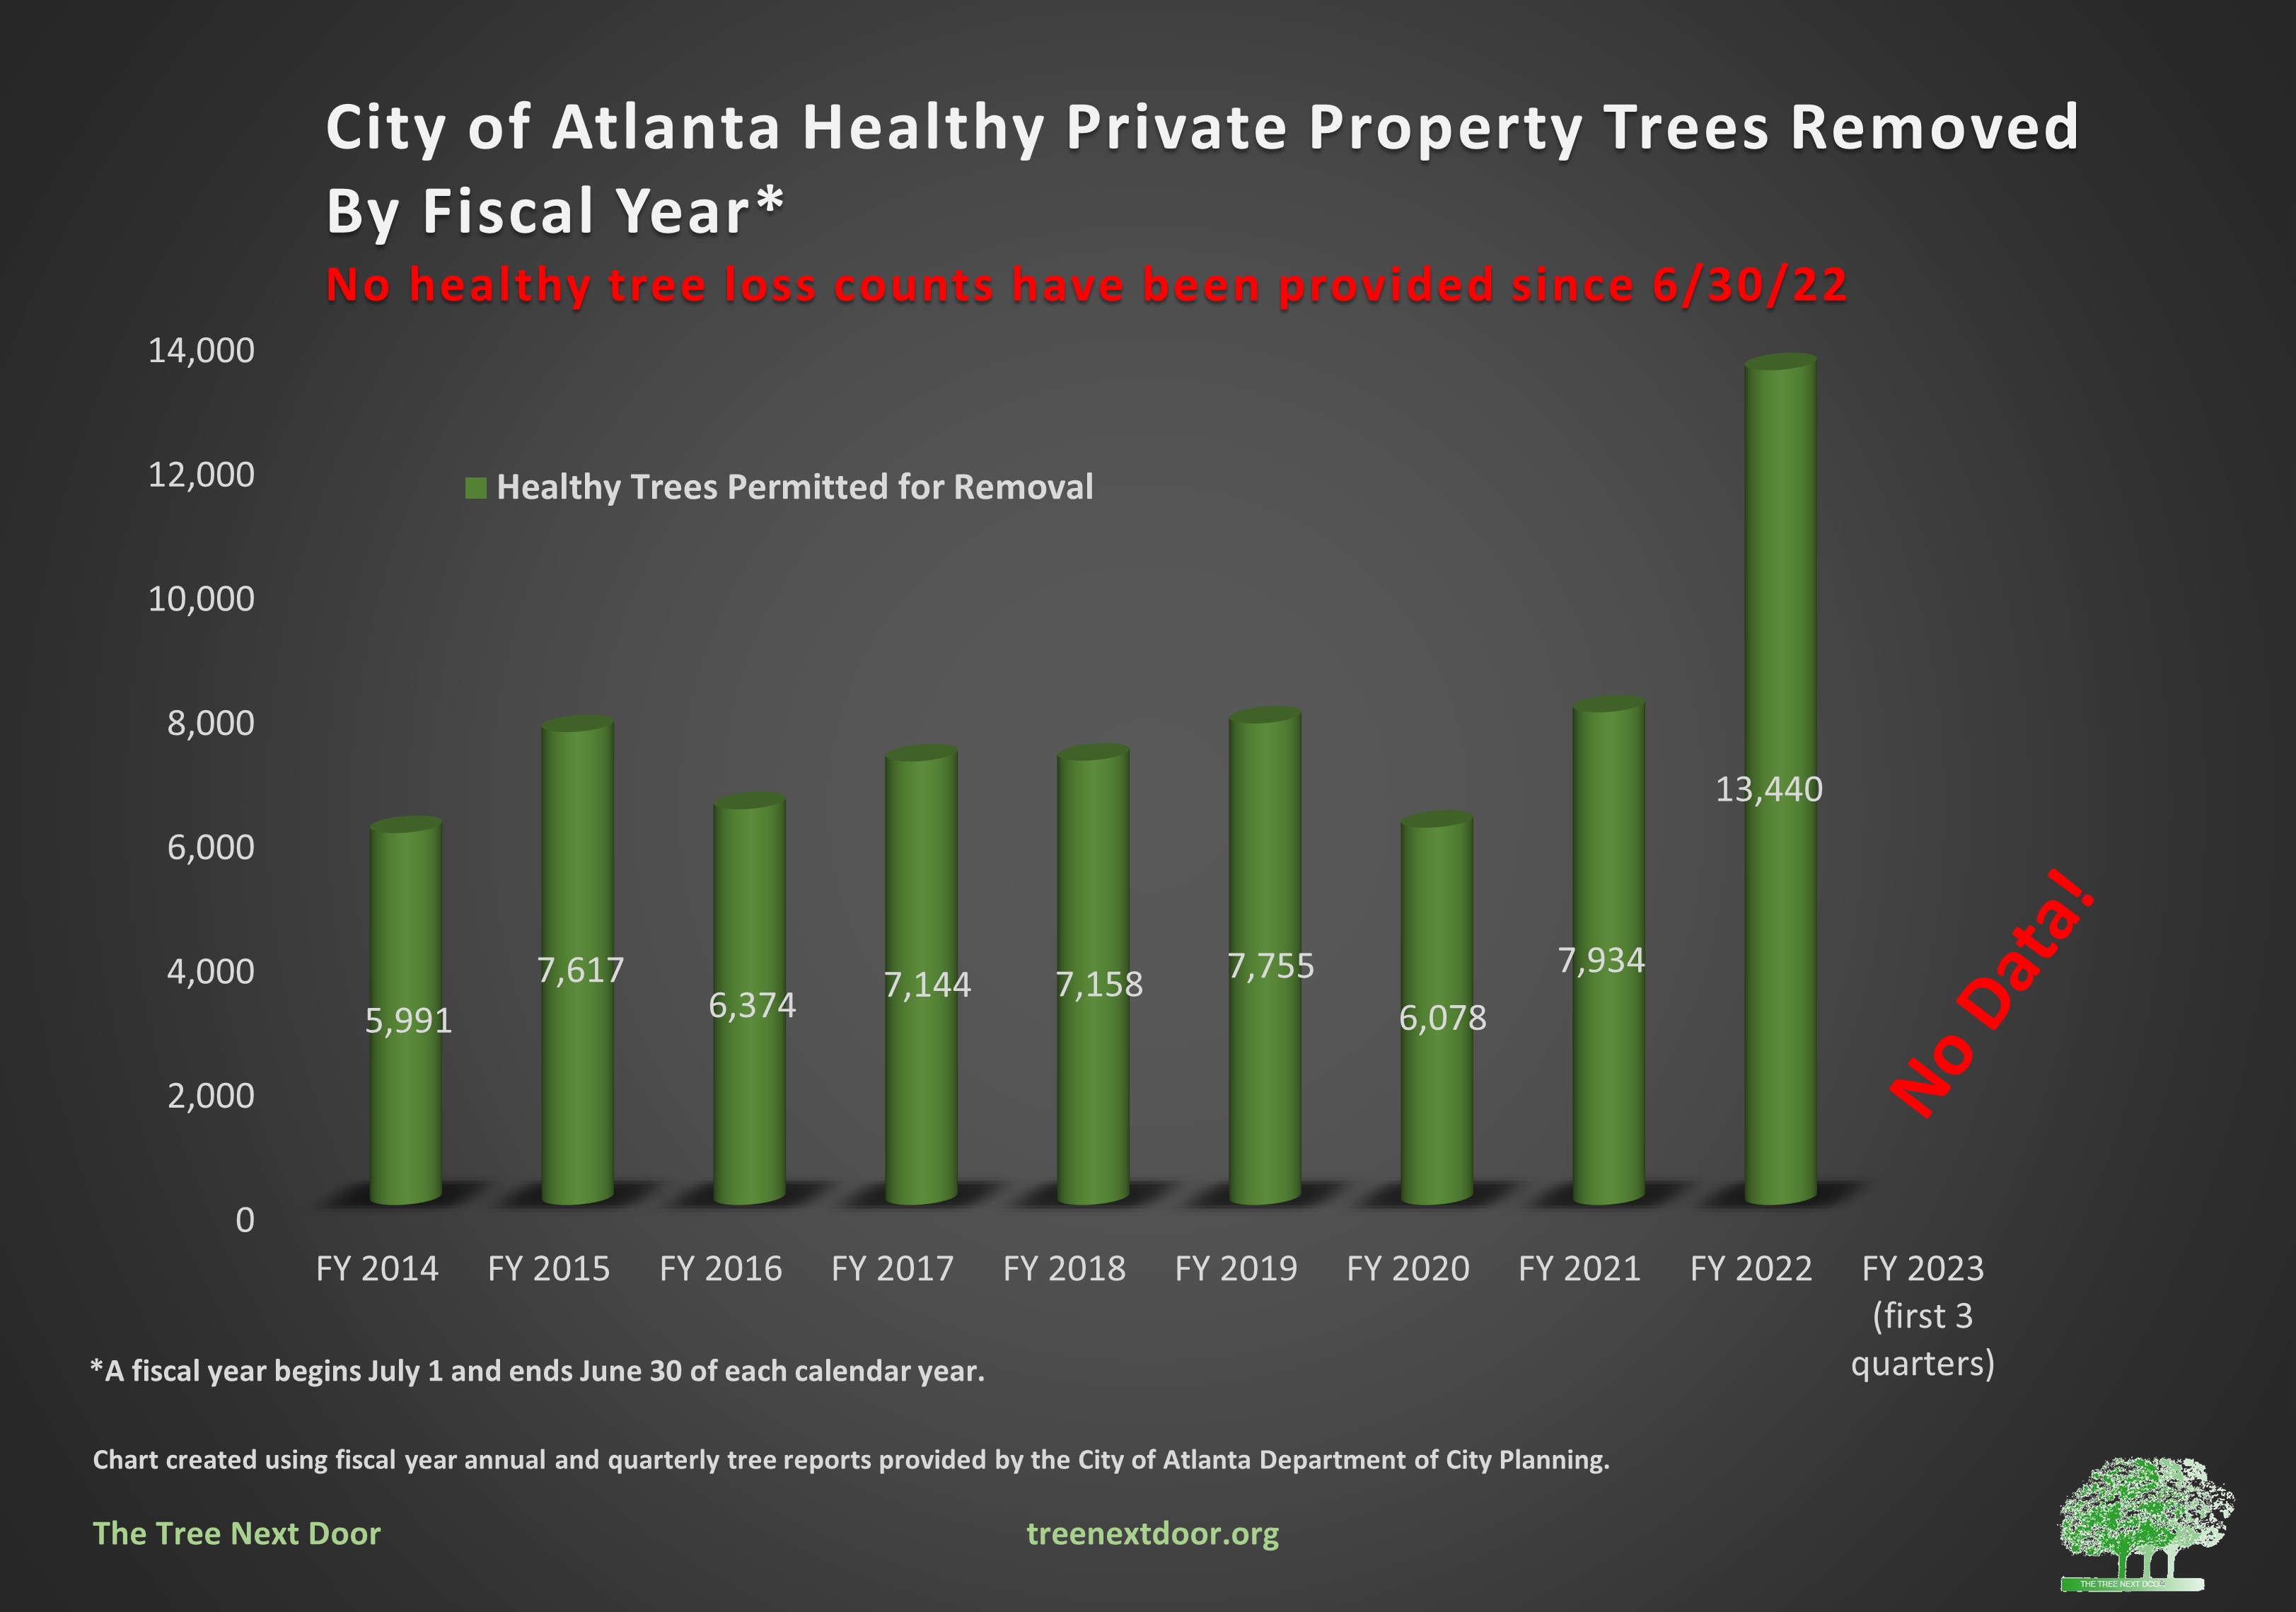 2023 healthy tree trend line qtrs 1-3